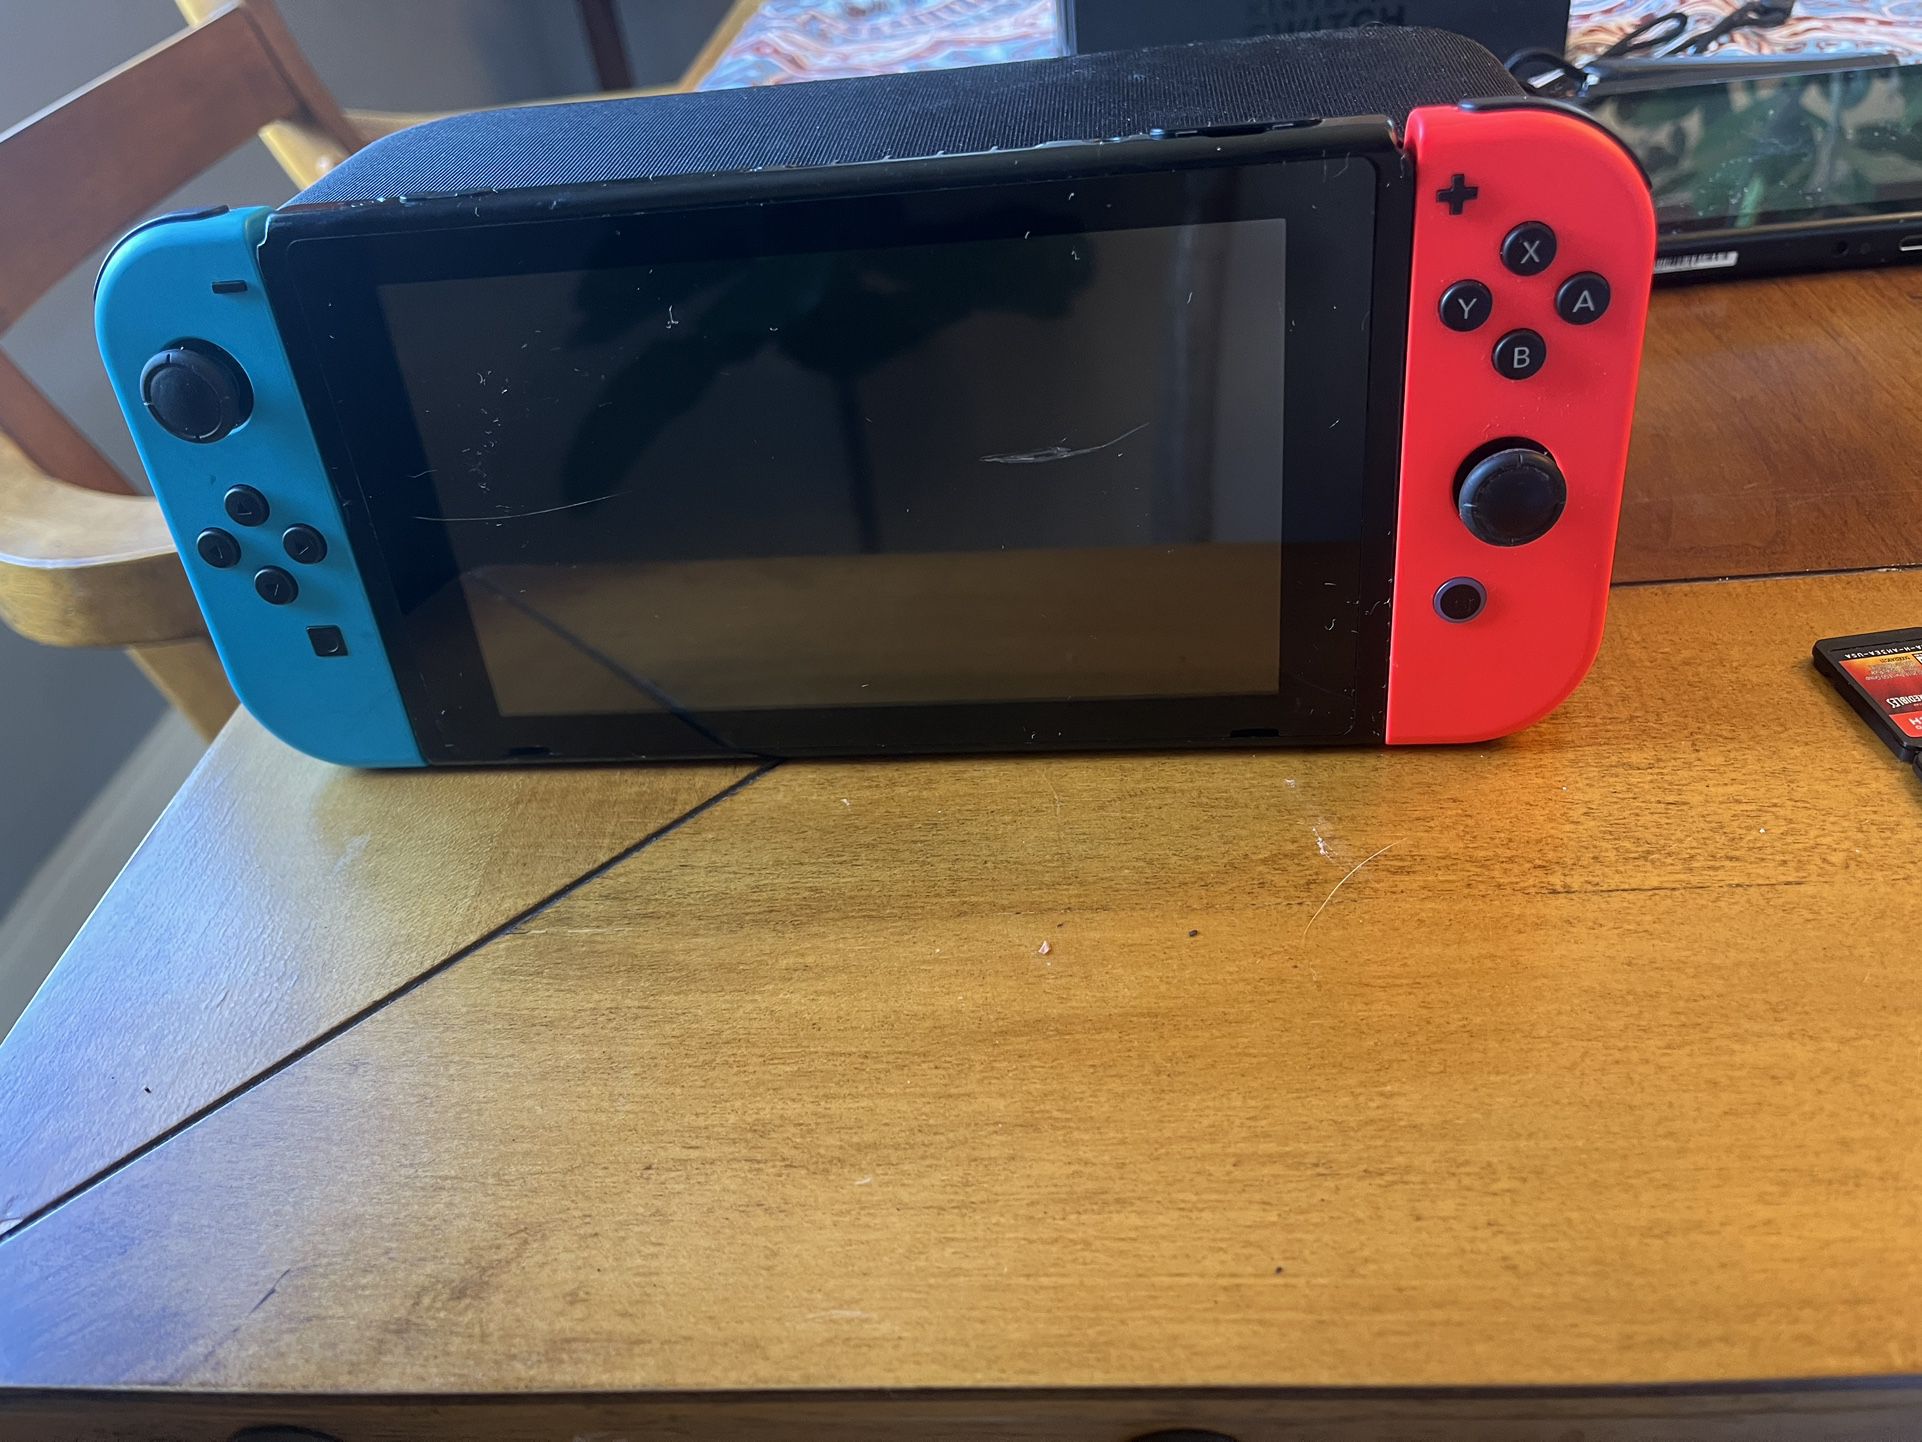 Nintendo Switch Super Mario Odyssey Game With Bonus Traveler's Guide CIB  Complete for Sale in Kissimmee, FL - OfferUp